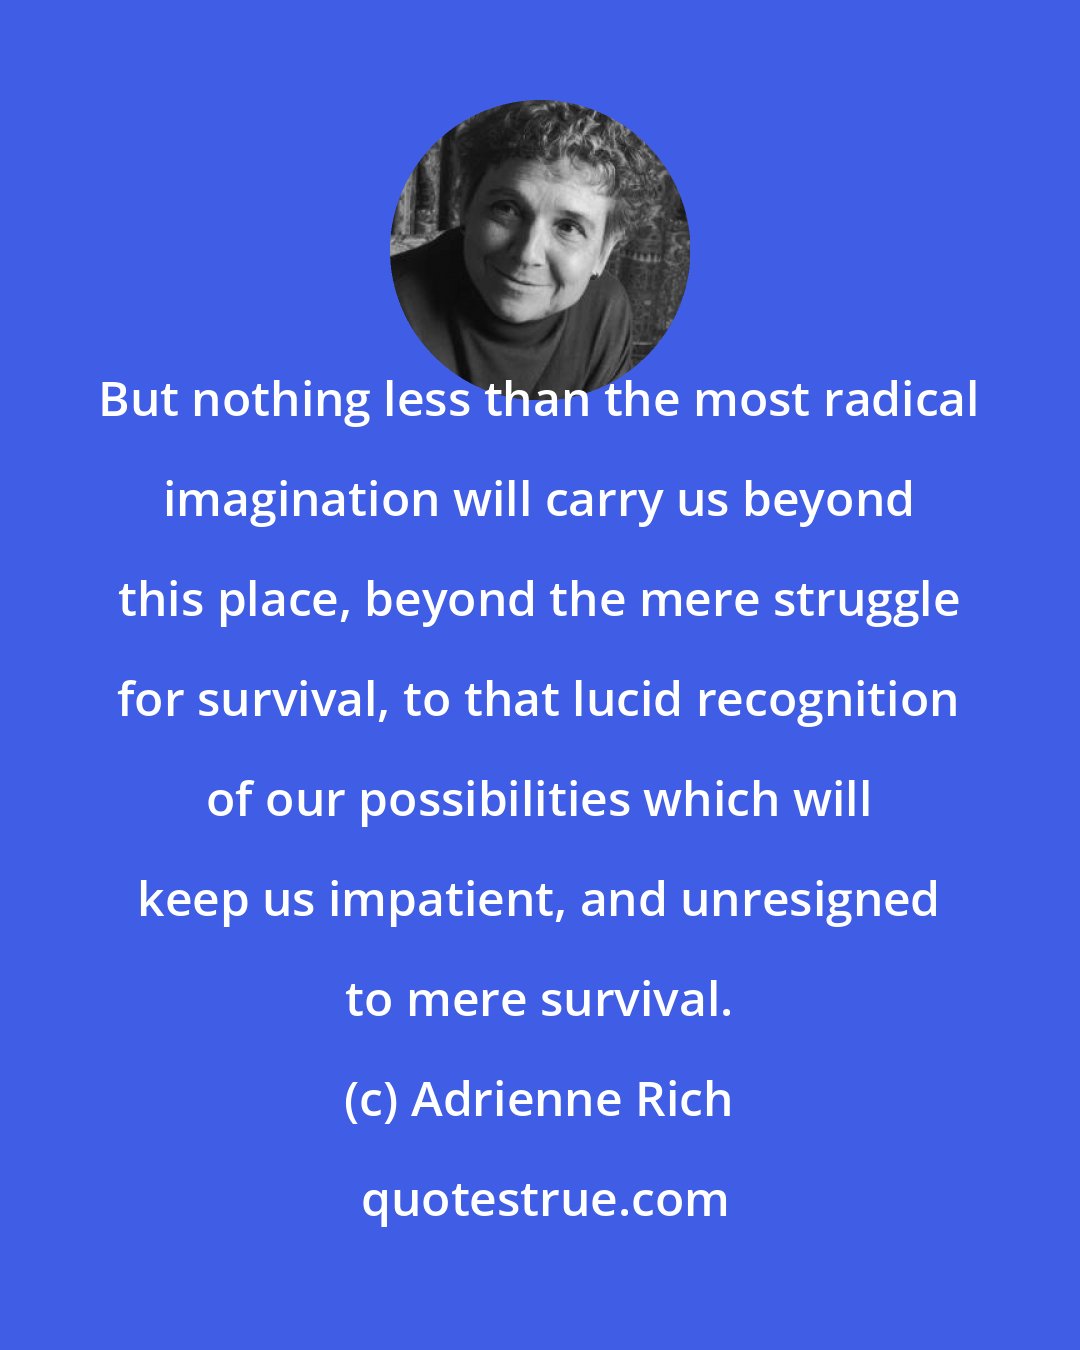 Adrienne Rich: But nothing less than the most radical imagination will carry us beyond this place, beyond the mere struggle for survival, to that lucid recognition of our possibilities which will keep us impatient, and unresigned to mere survival.